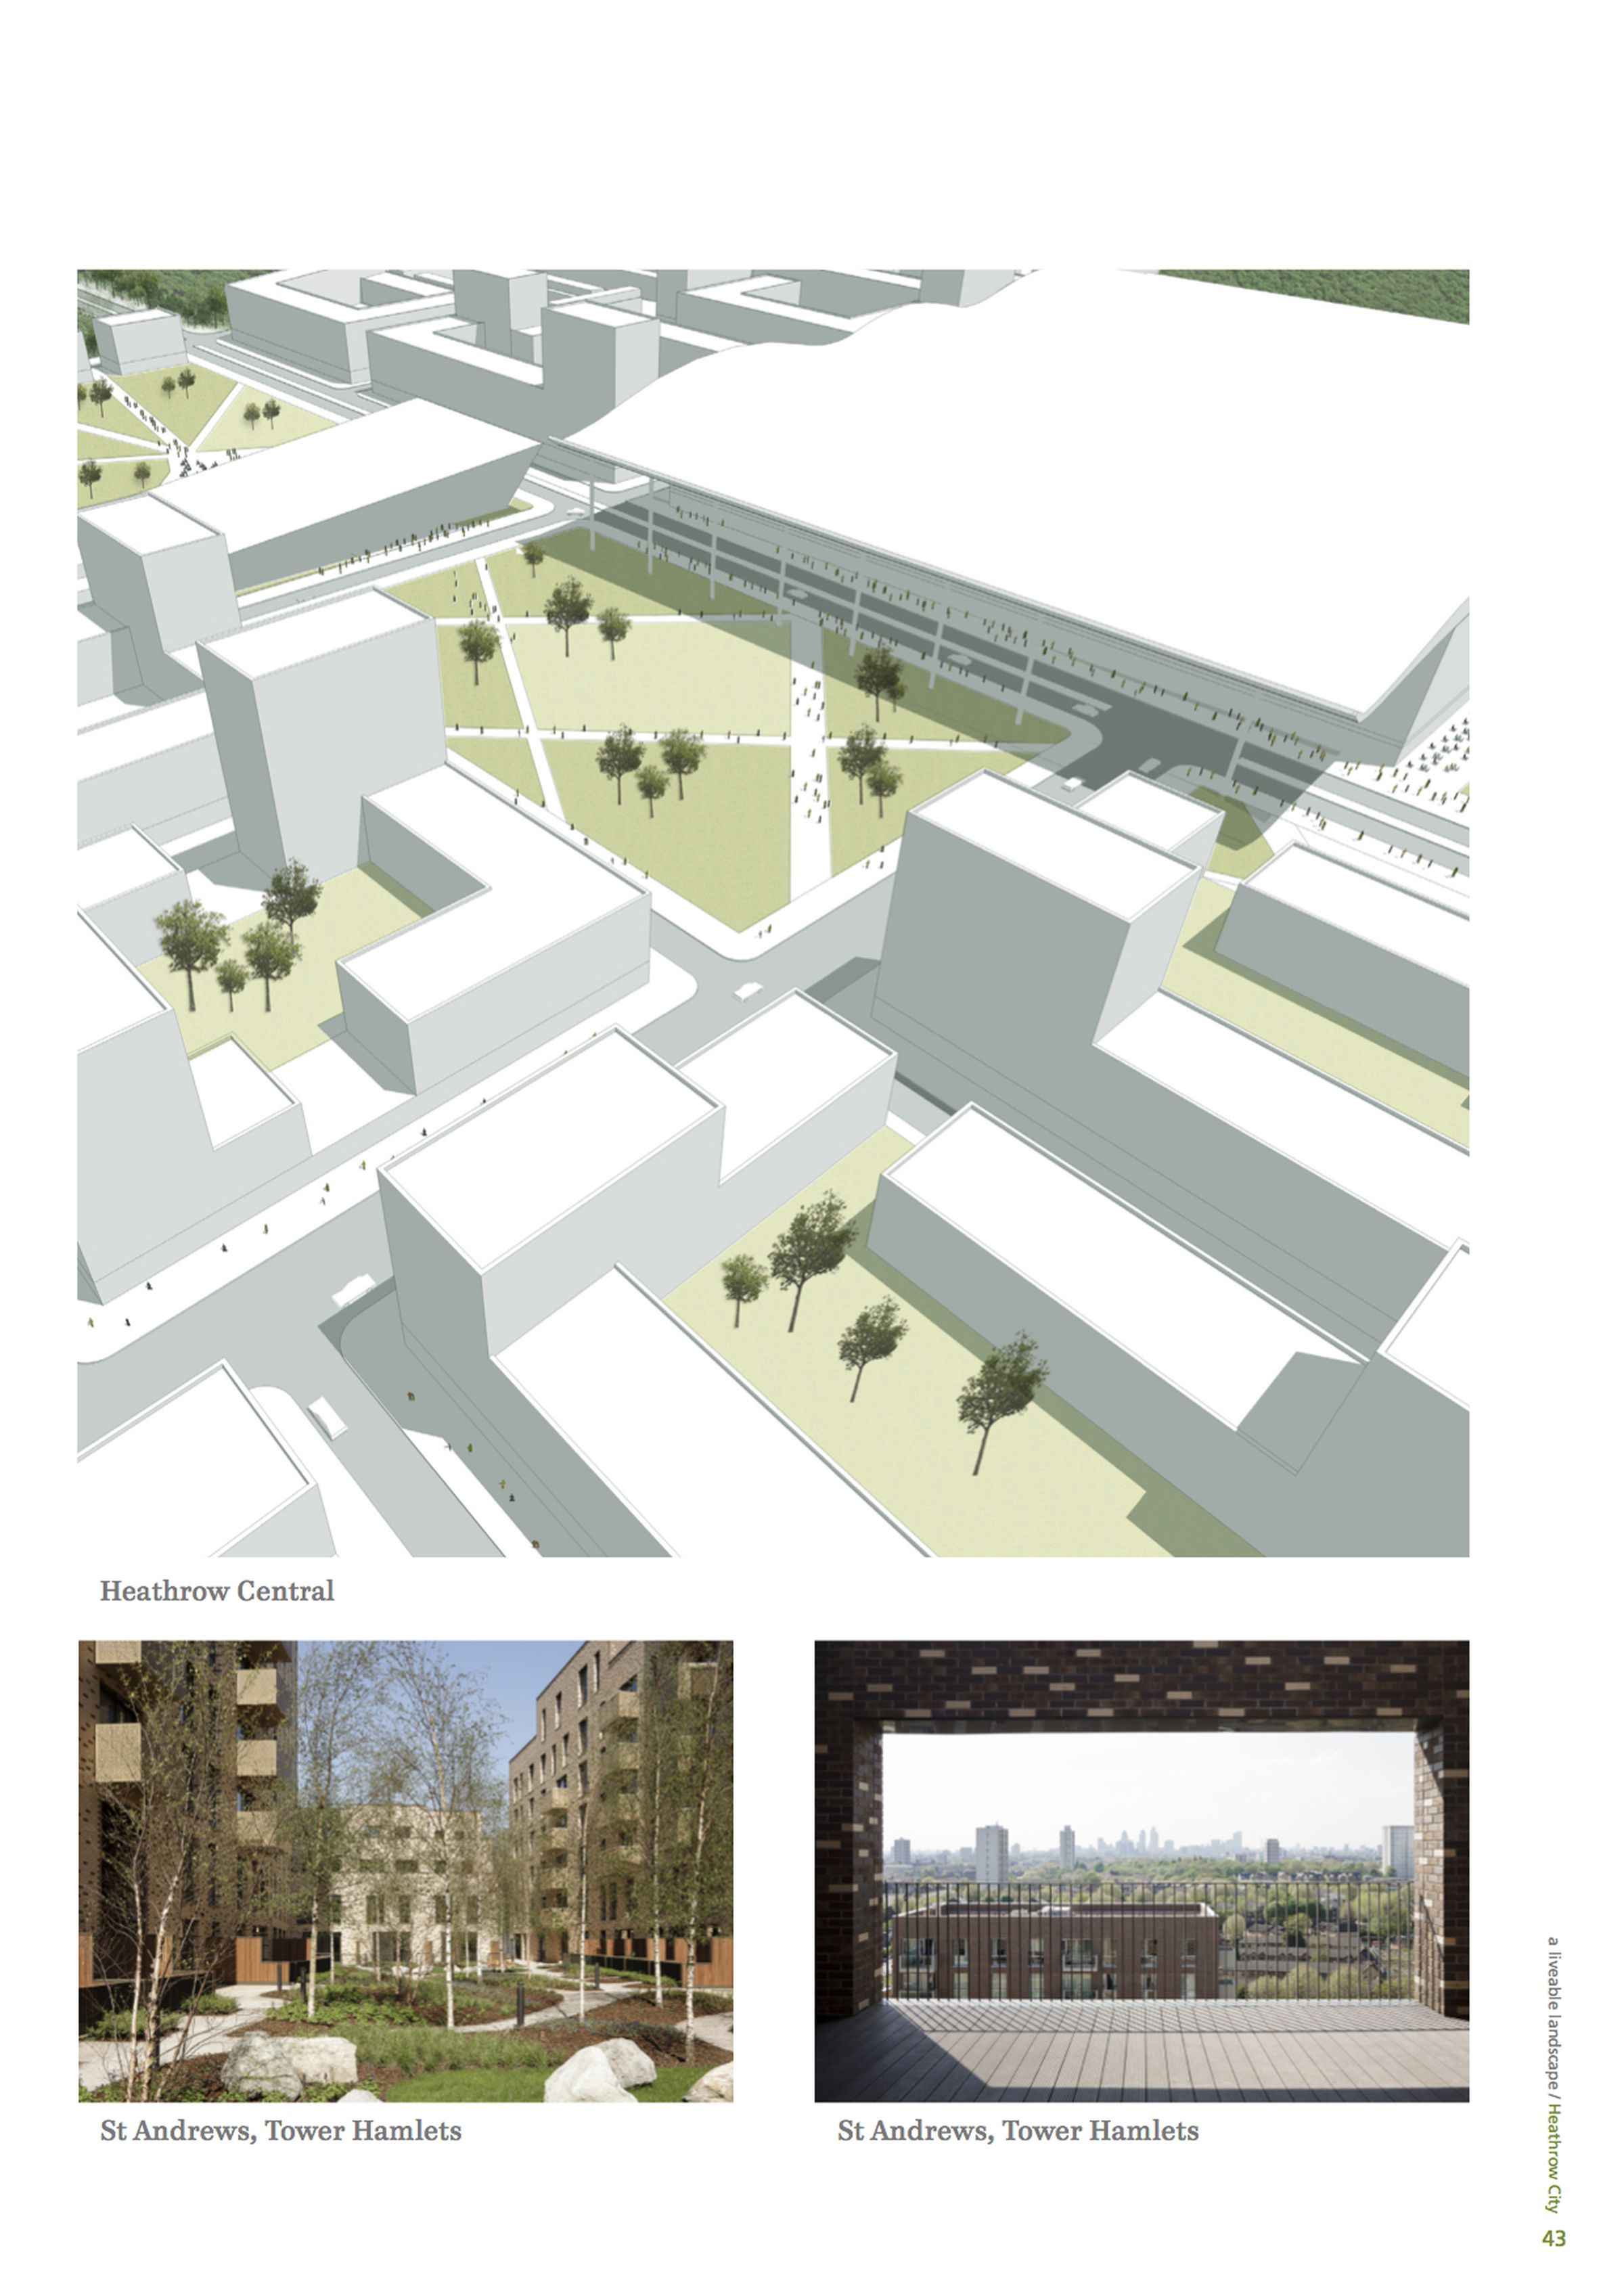 Heathrow City: three proposals for future metropolis selected by London Mayor's Office